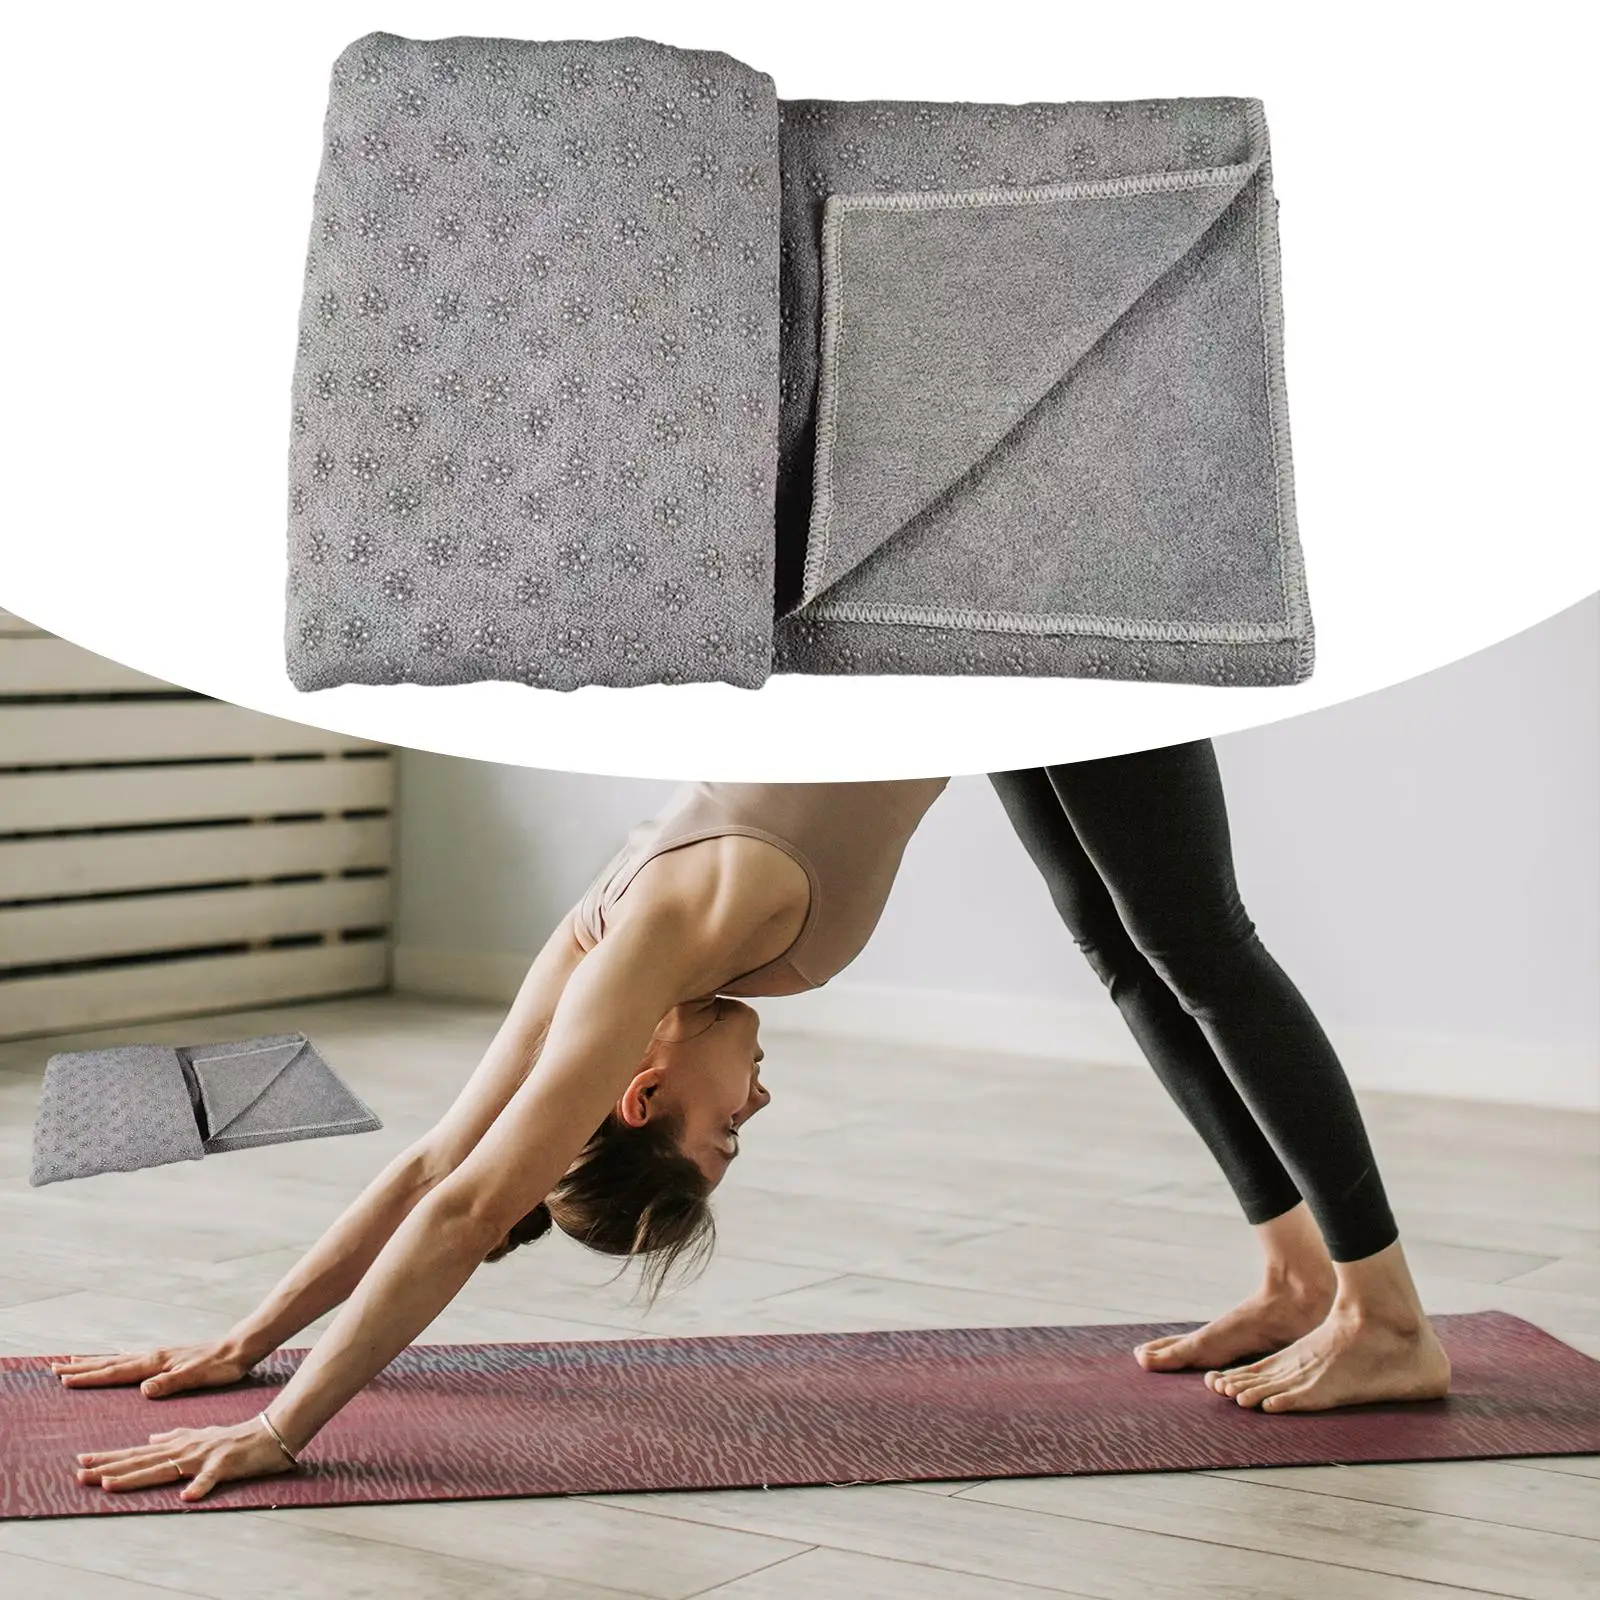 Yoga Towel for Yoga Mats Accessory Hot Yoga Mat Towel Exercise Mat Sweat Absorbent for Indoor Workout Travel Pilates Home Gym